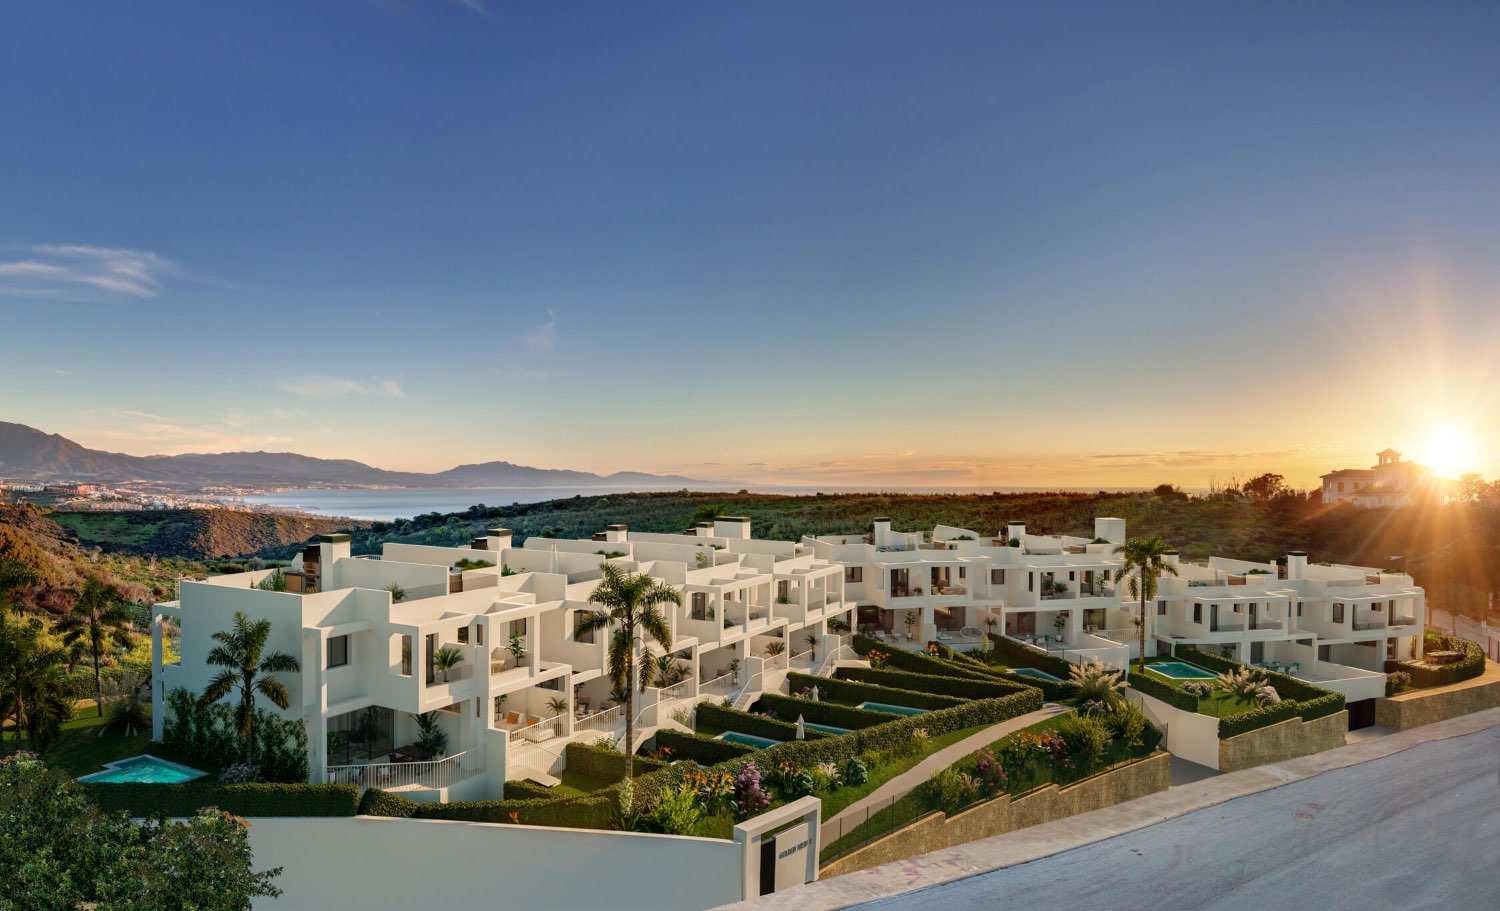 Newly built high quality townhouses with panoramic sea views